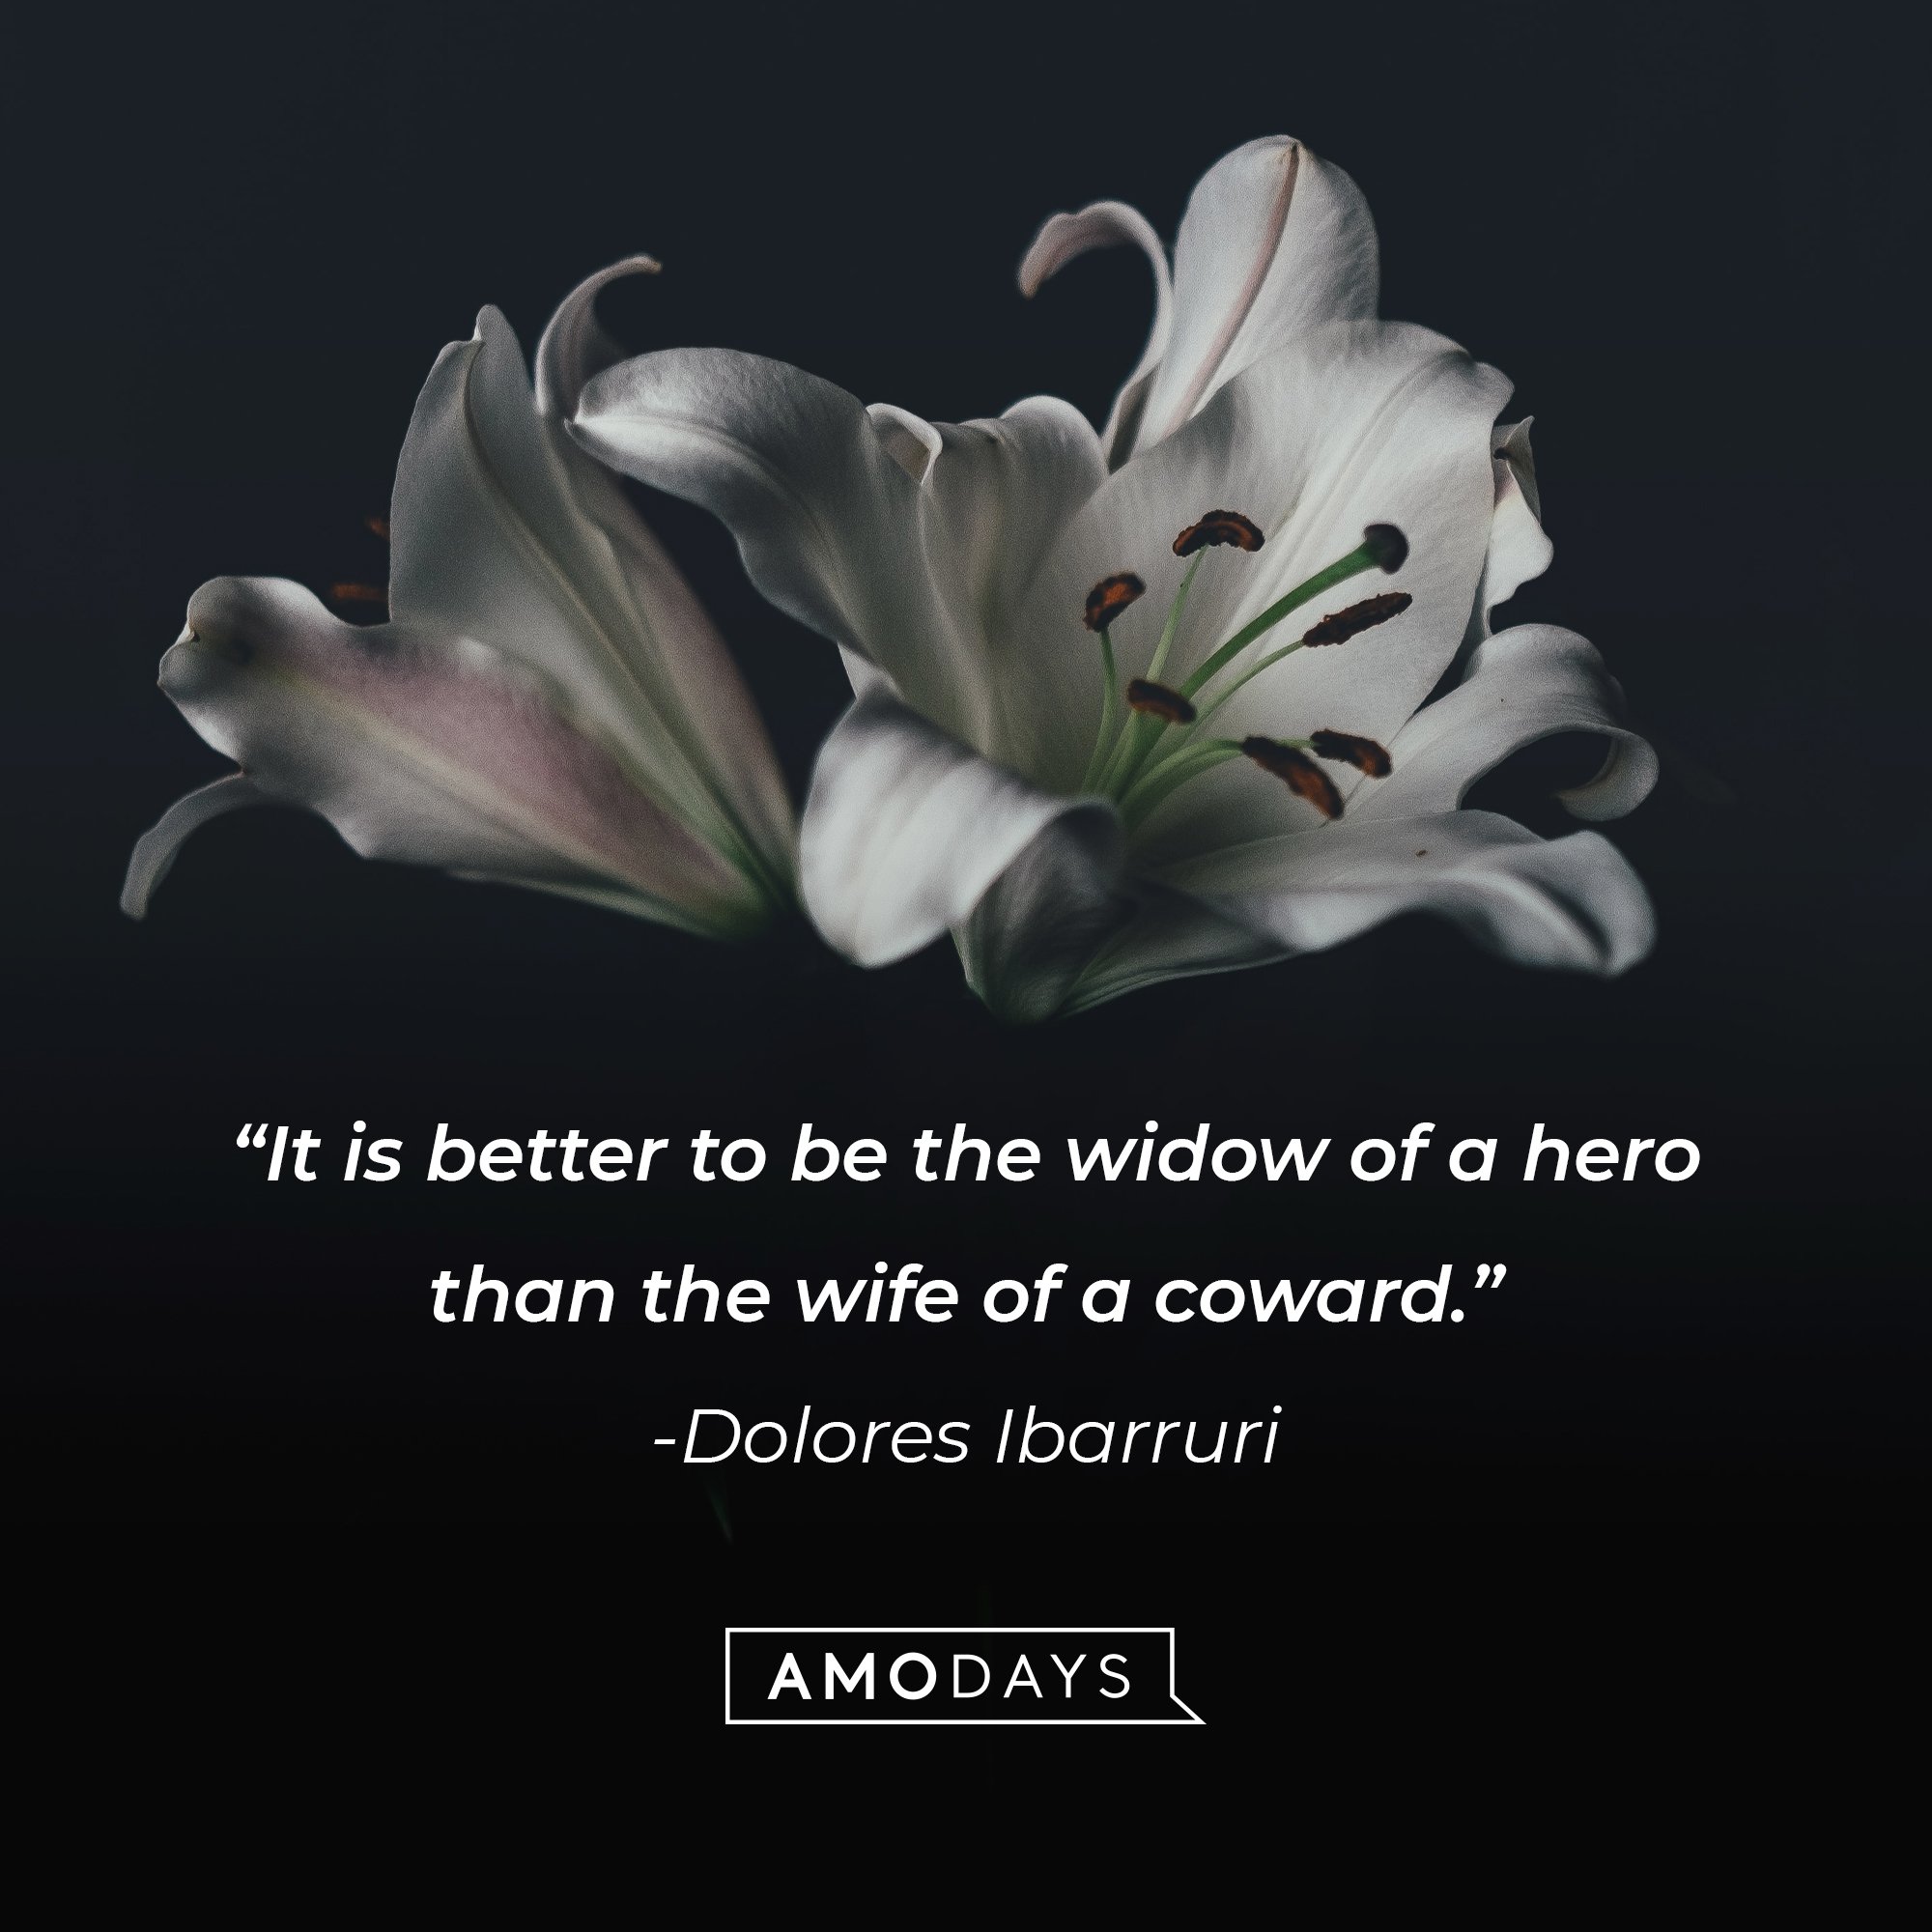 Dolores Ibarruri’s quote: "It is better to be the widow of a hero than the wife of a coward. | Image: AmoDays